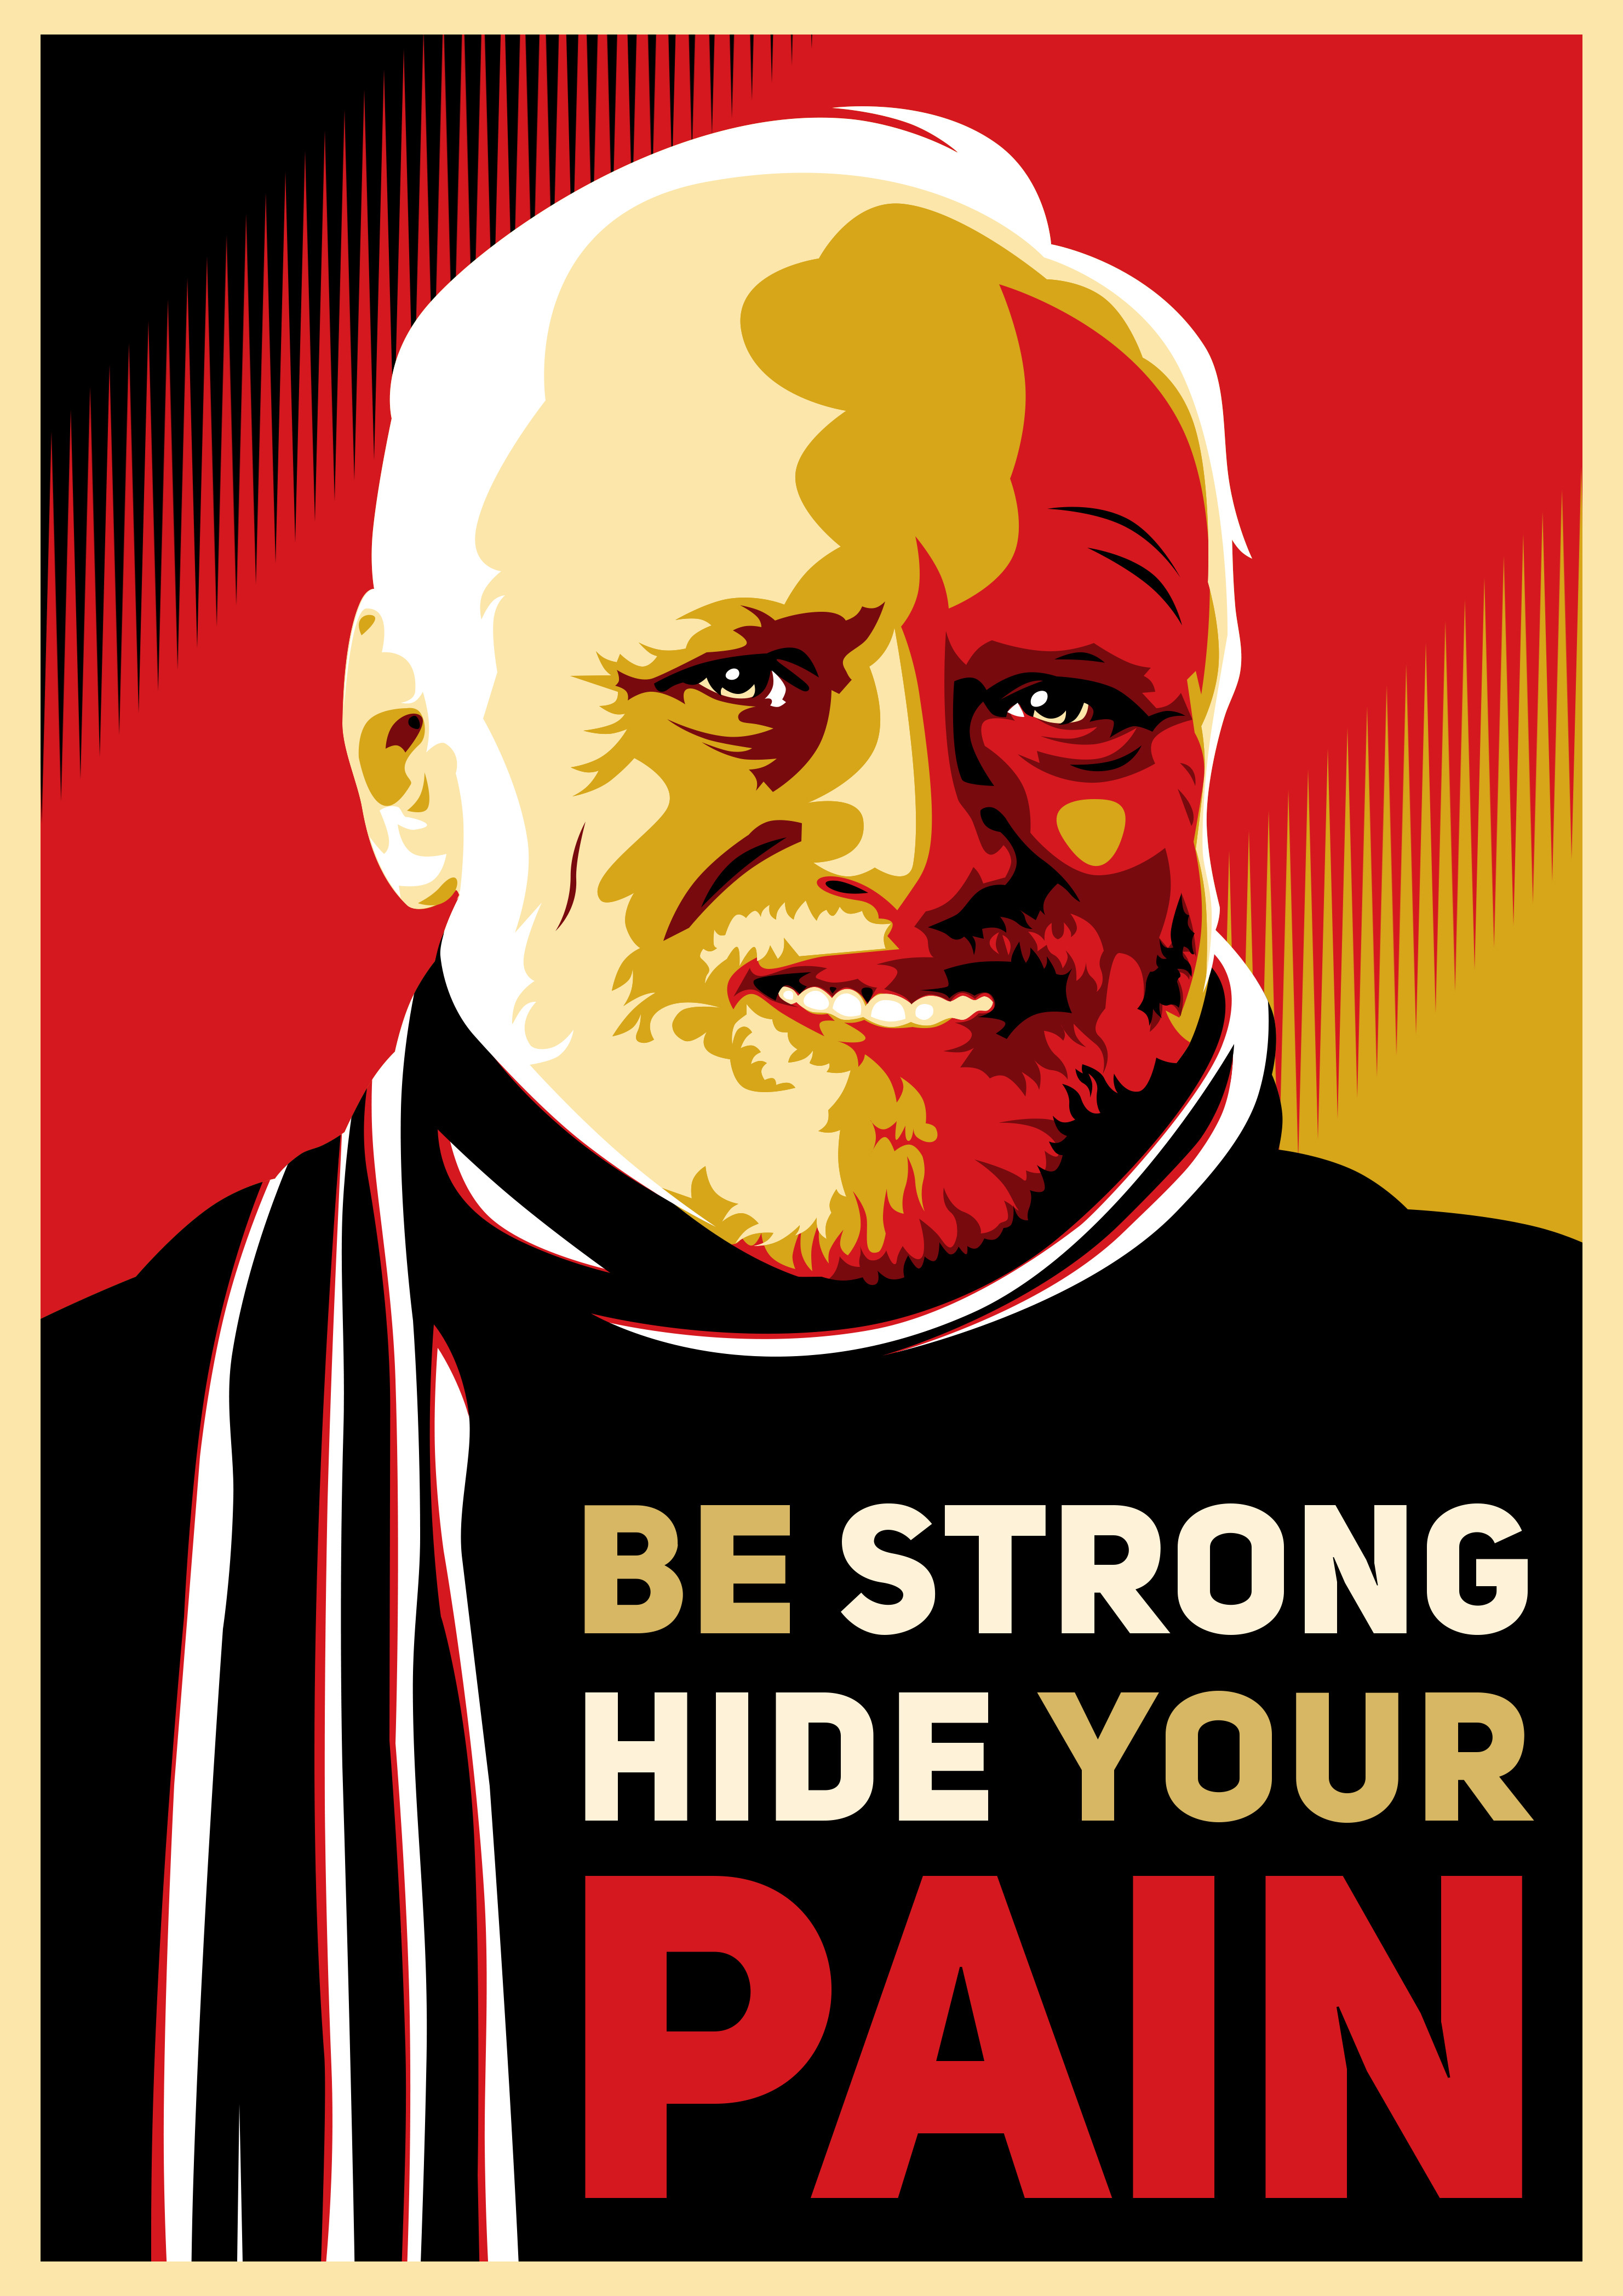 hide the pain harold poster - Be Strong Hide Your Pain